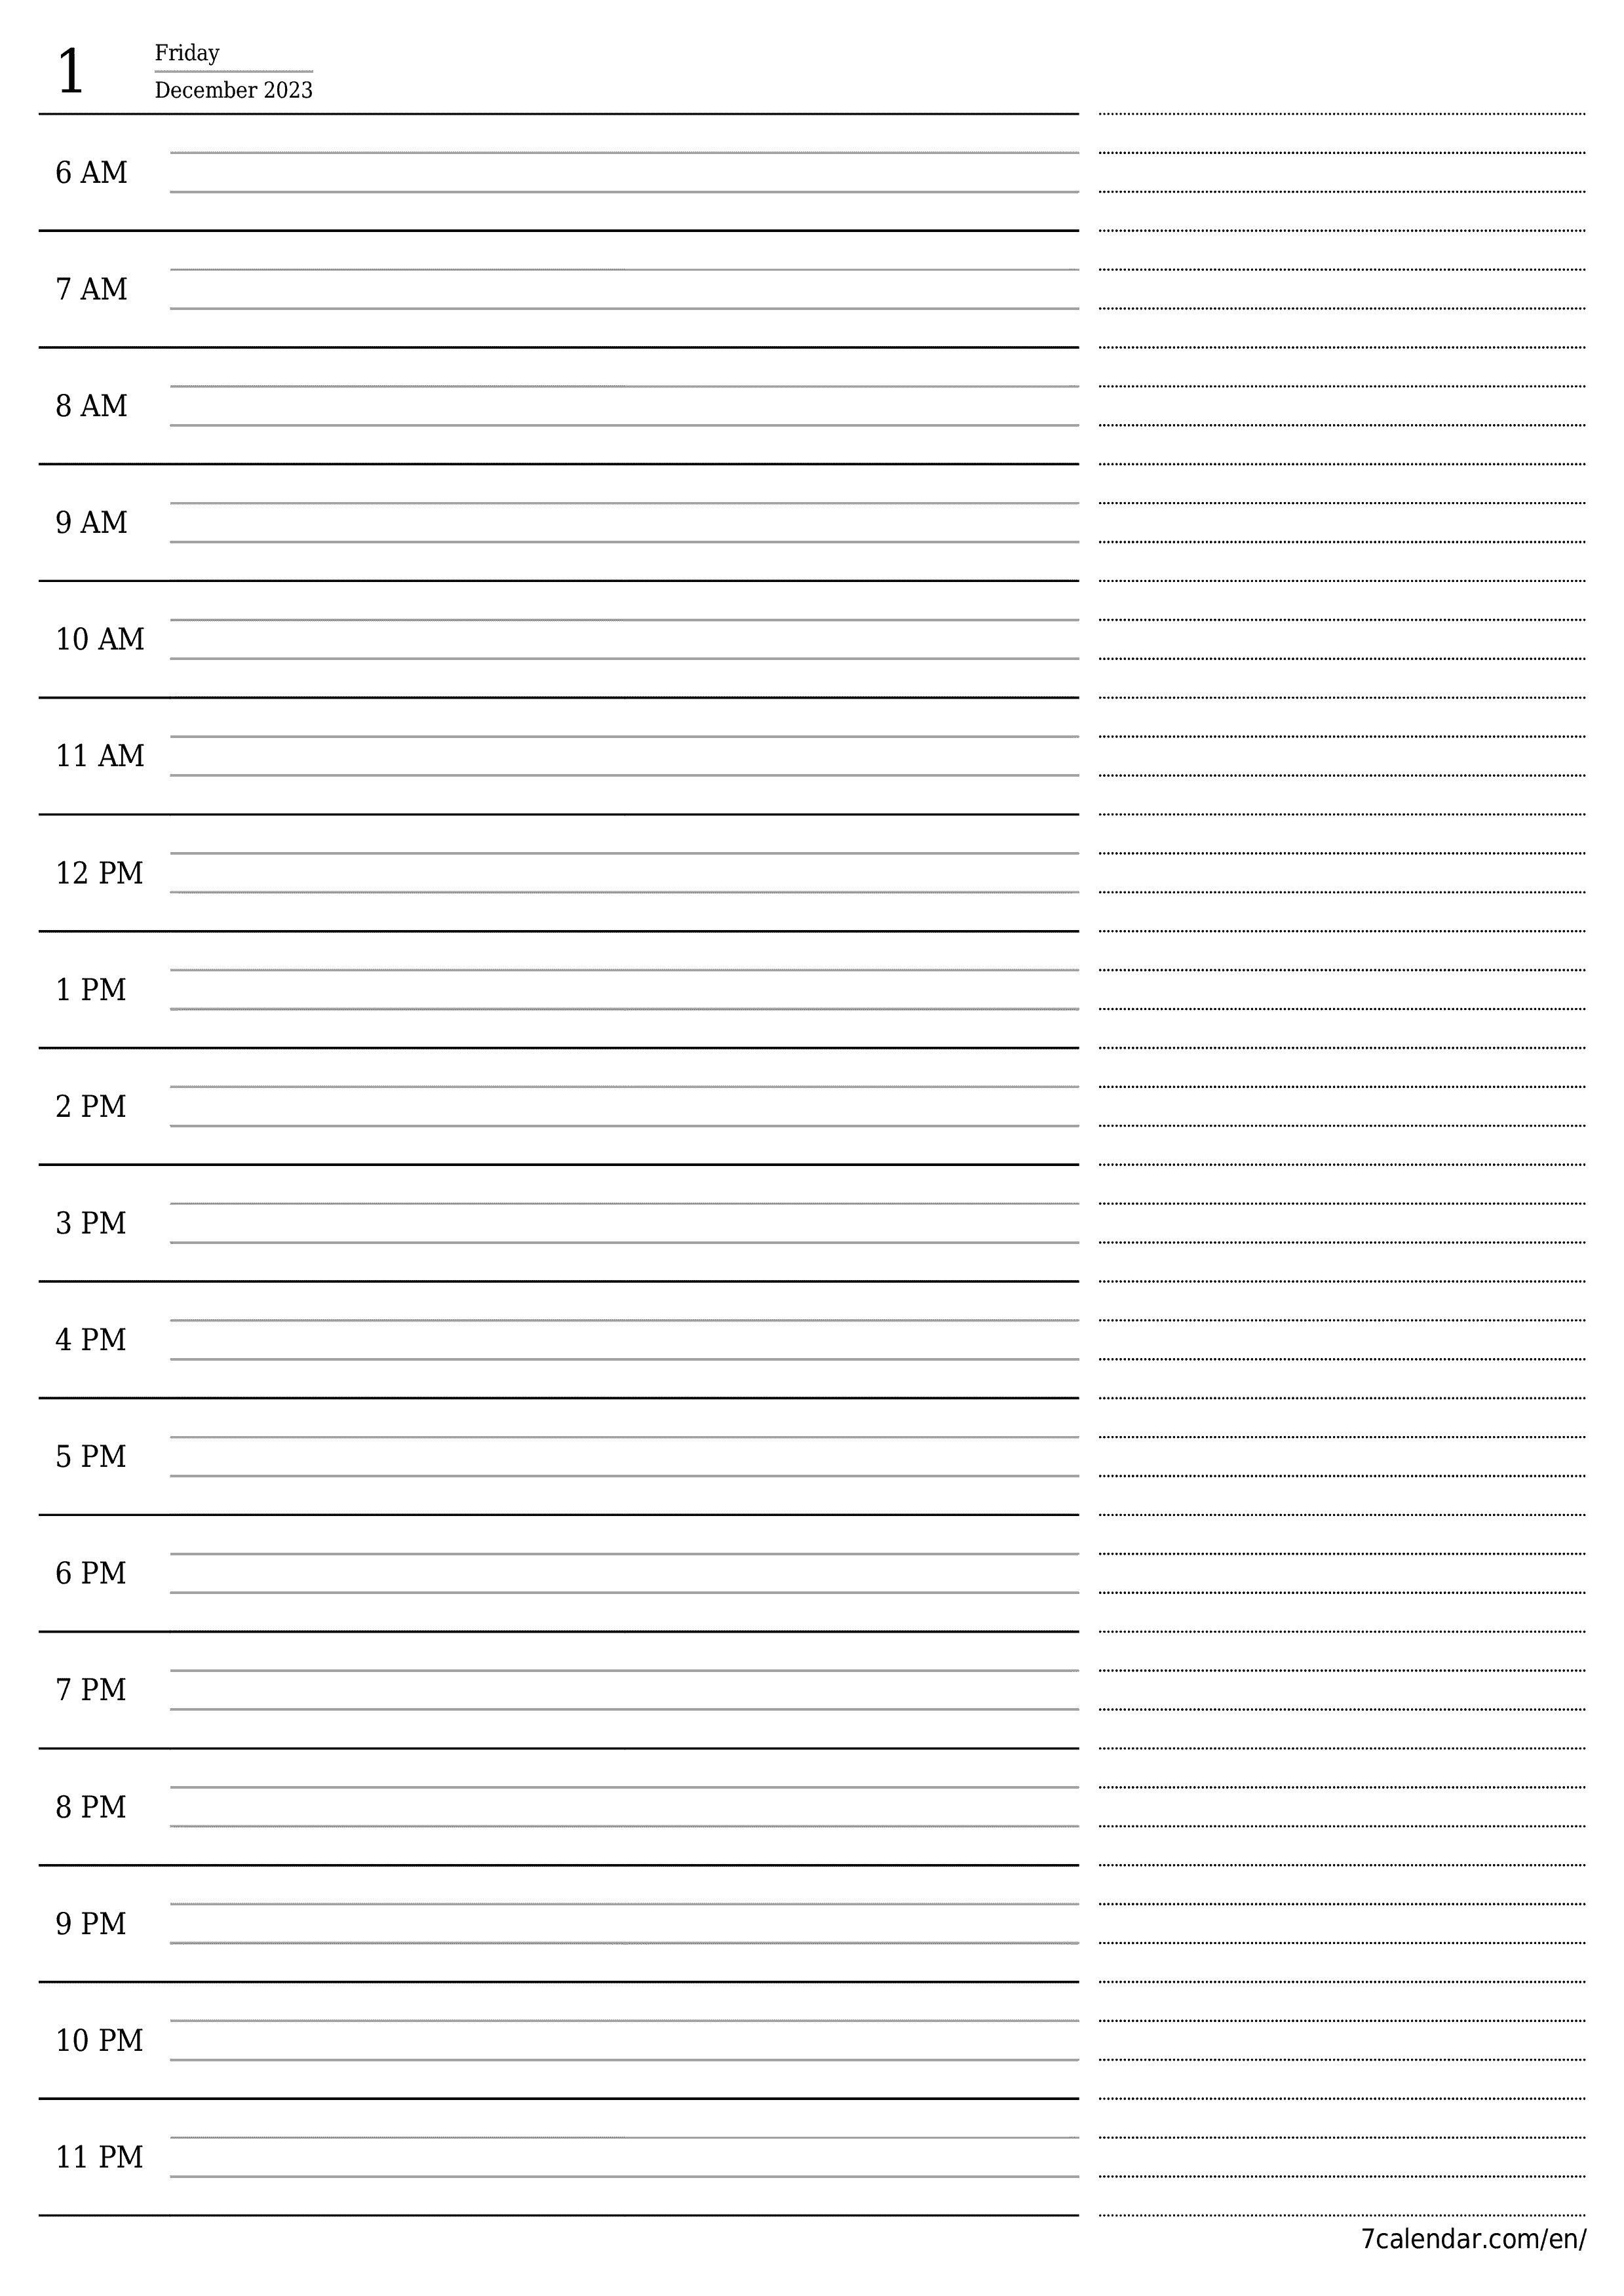 Blank daily calendar planner for day December 2023 with notes, save and print to PDF PNG English - 7calendar.com